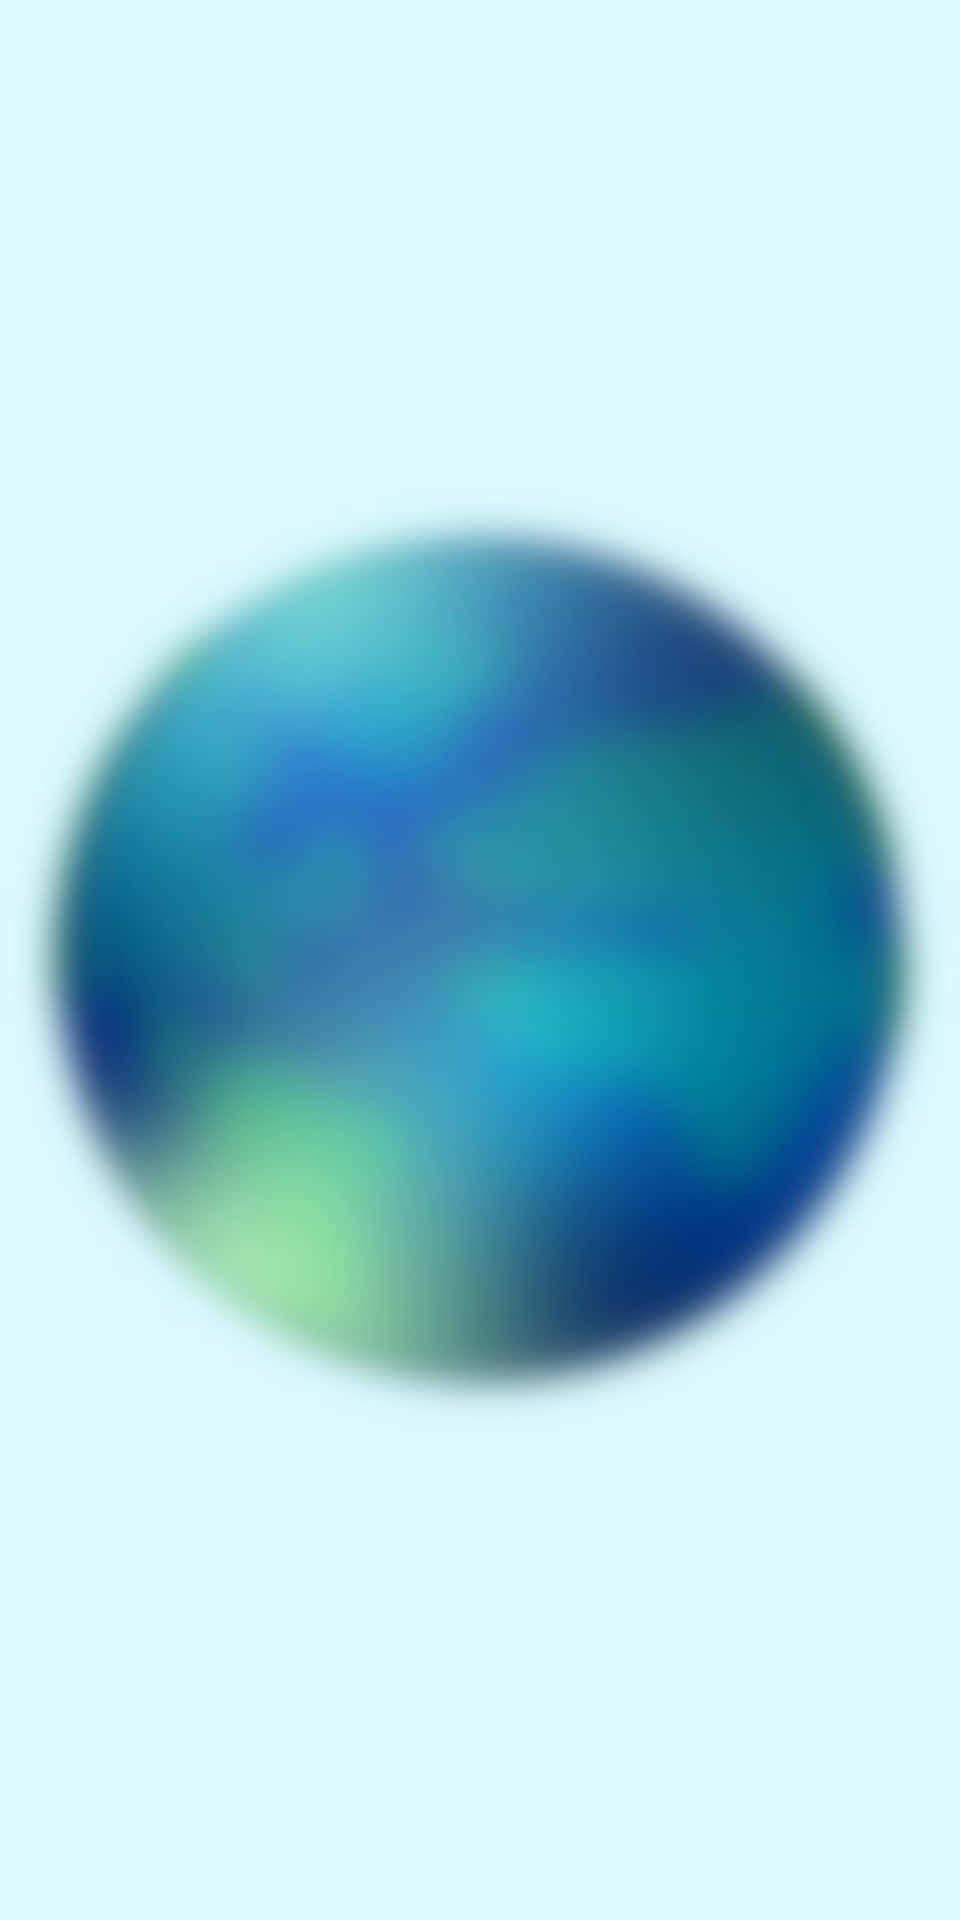 World Globe Aura Background For Android And Mobile Phones